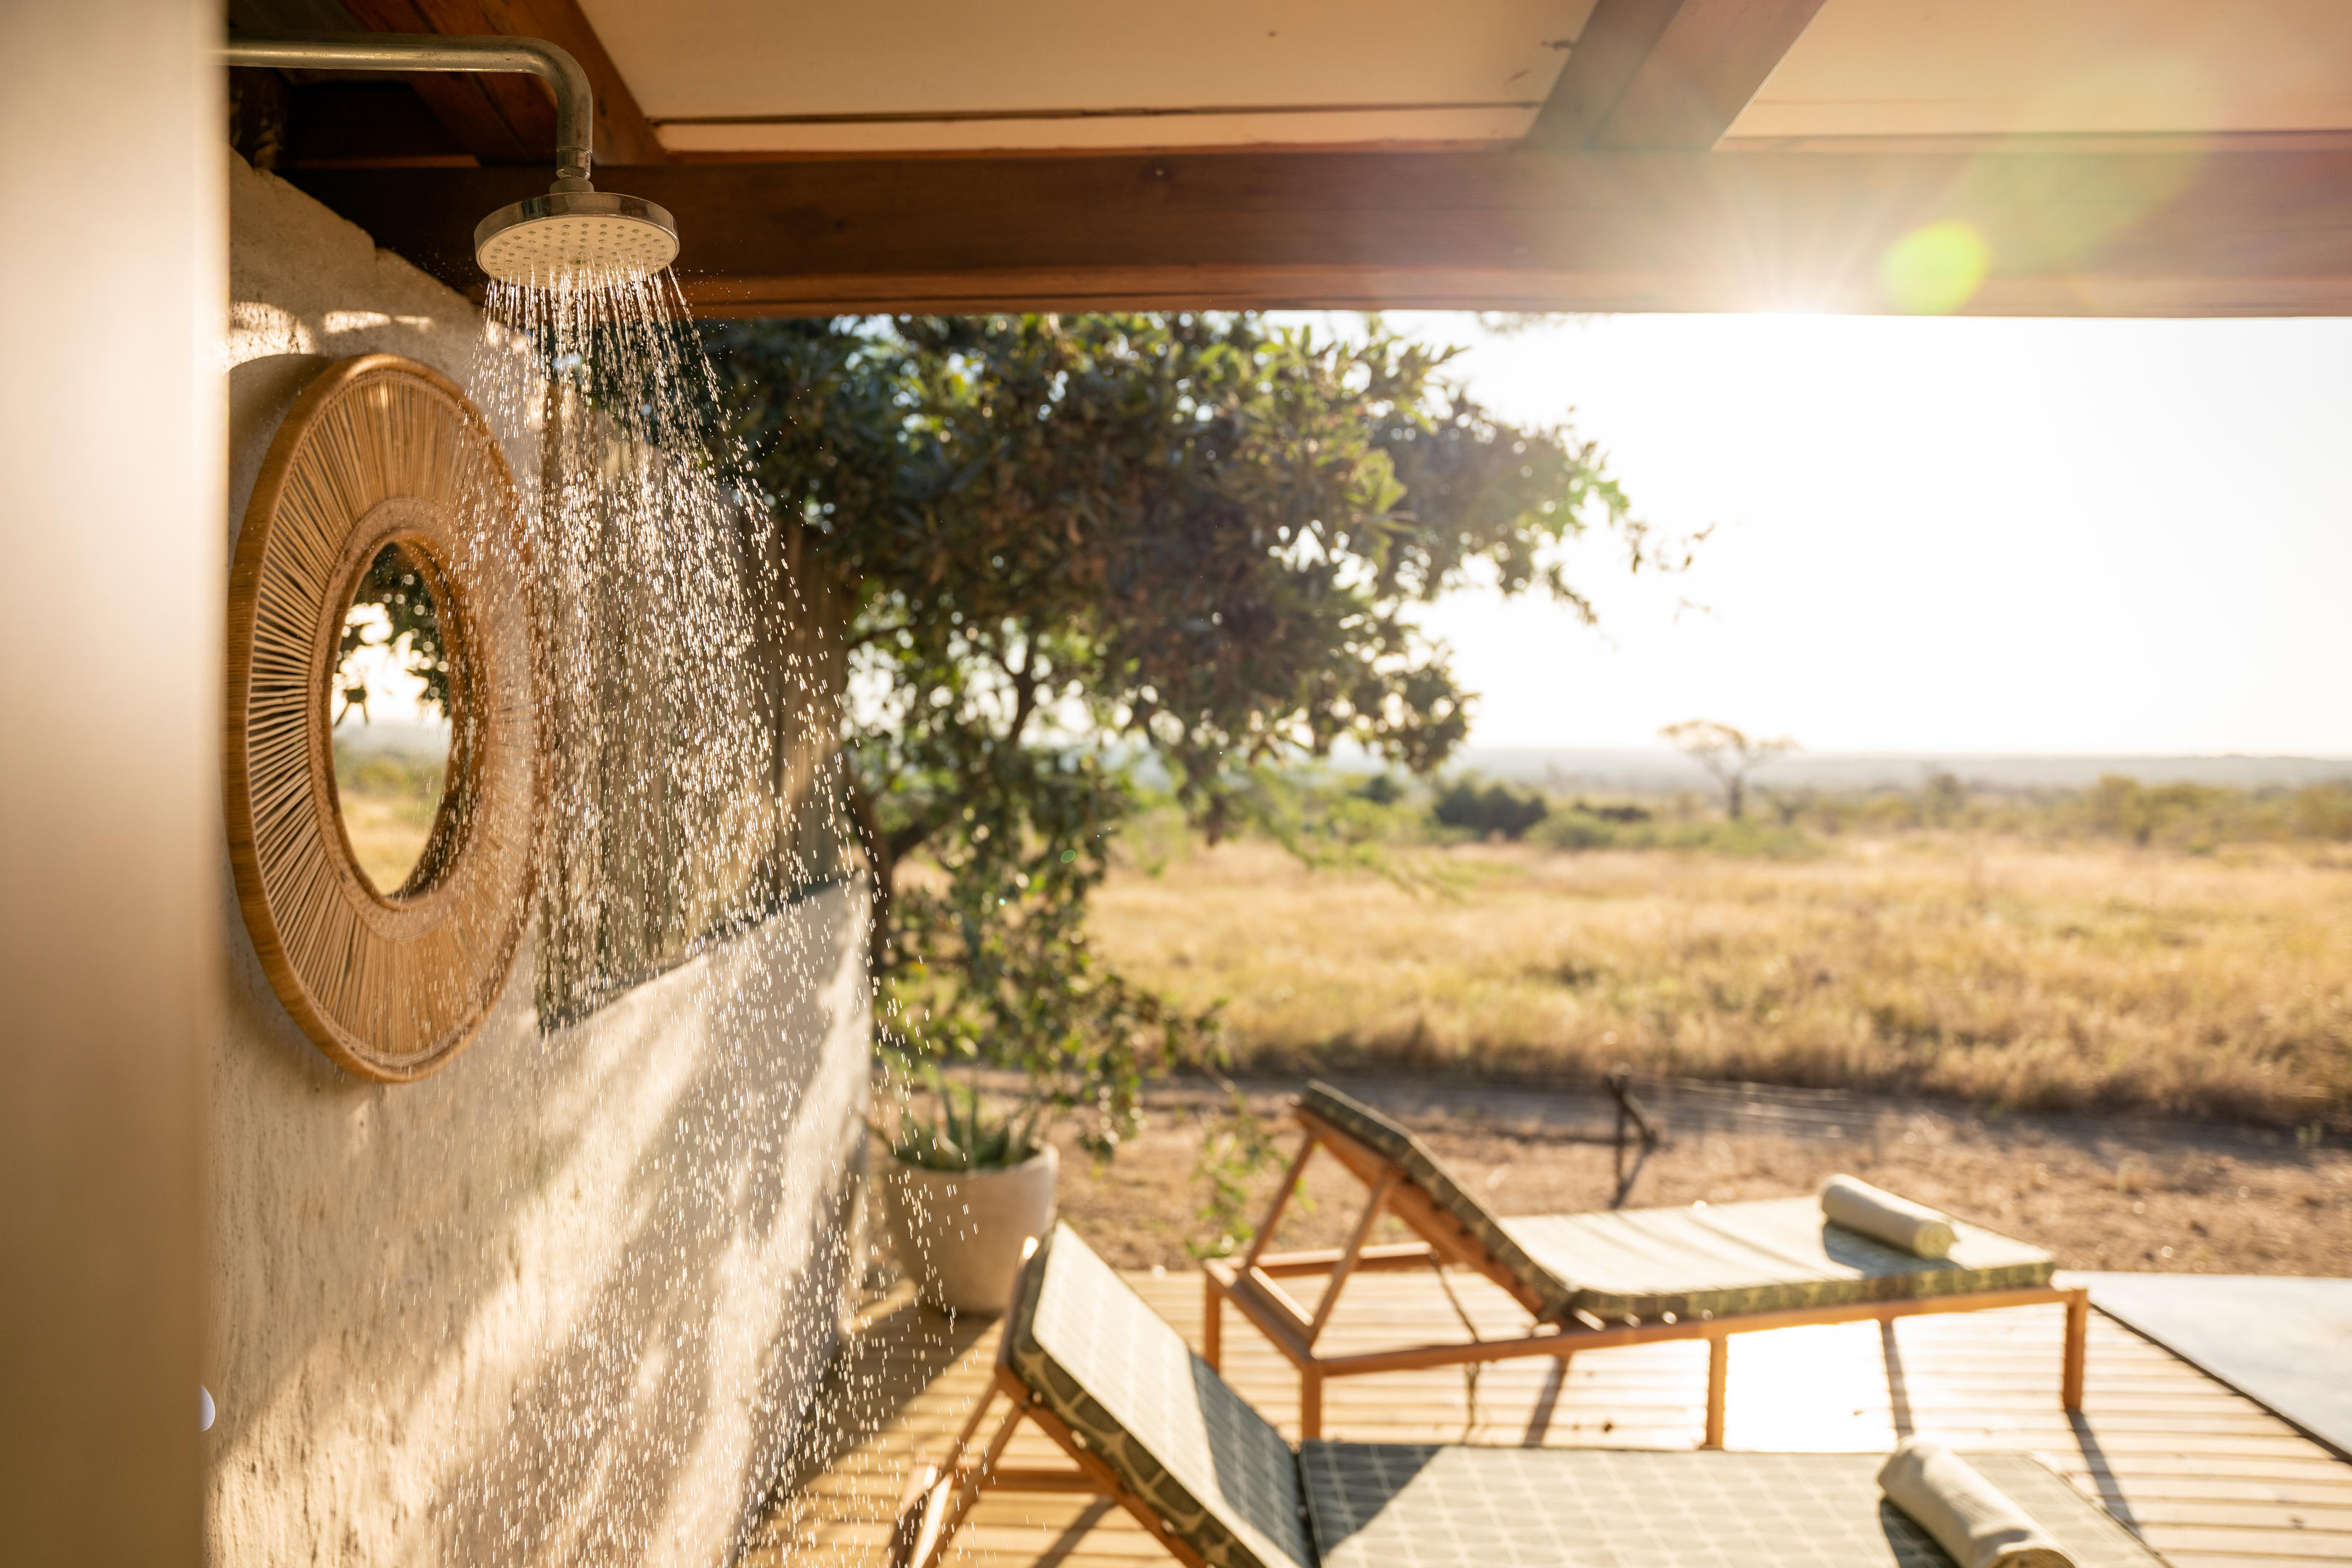 outdoor shower, walkers plains camp, timbavati reserve, south africa